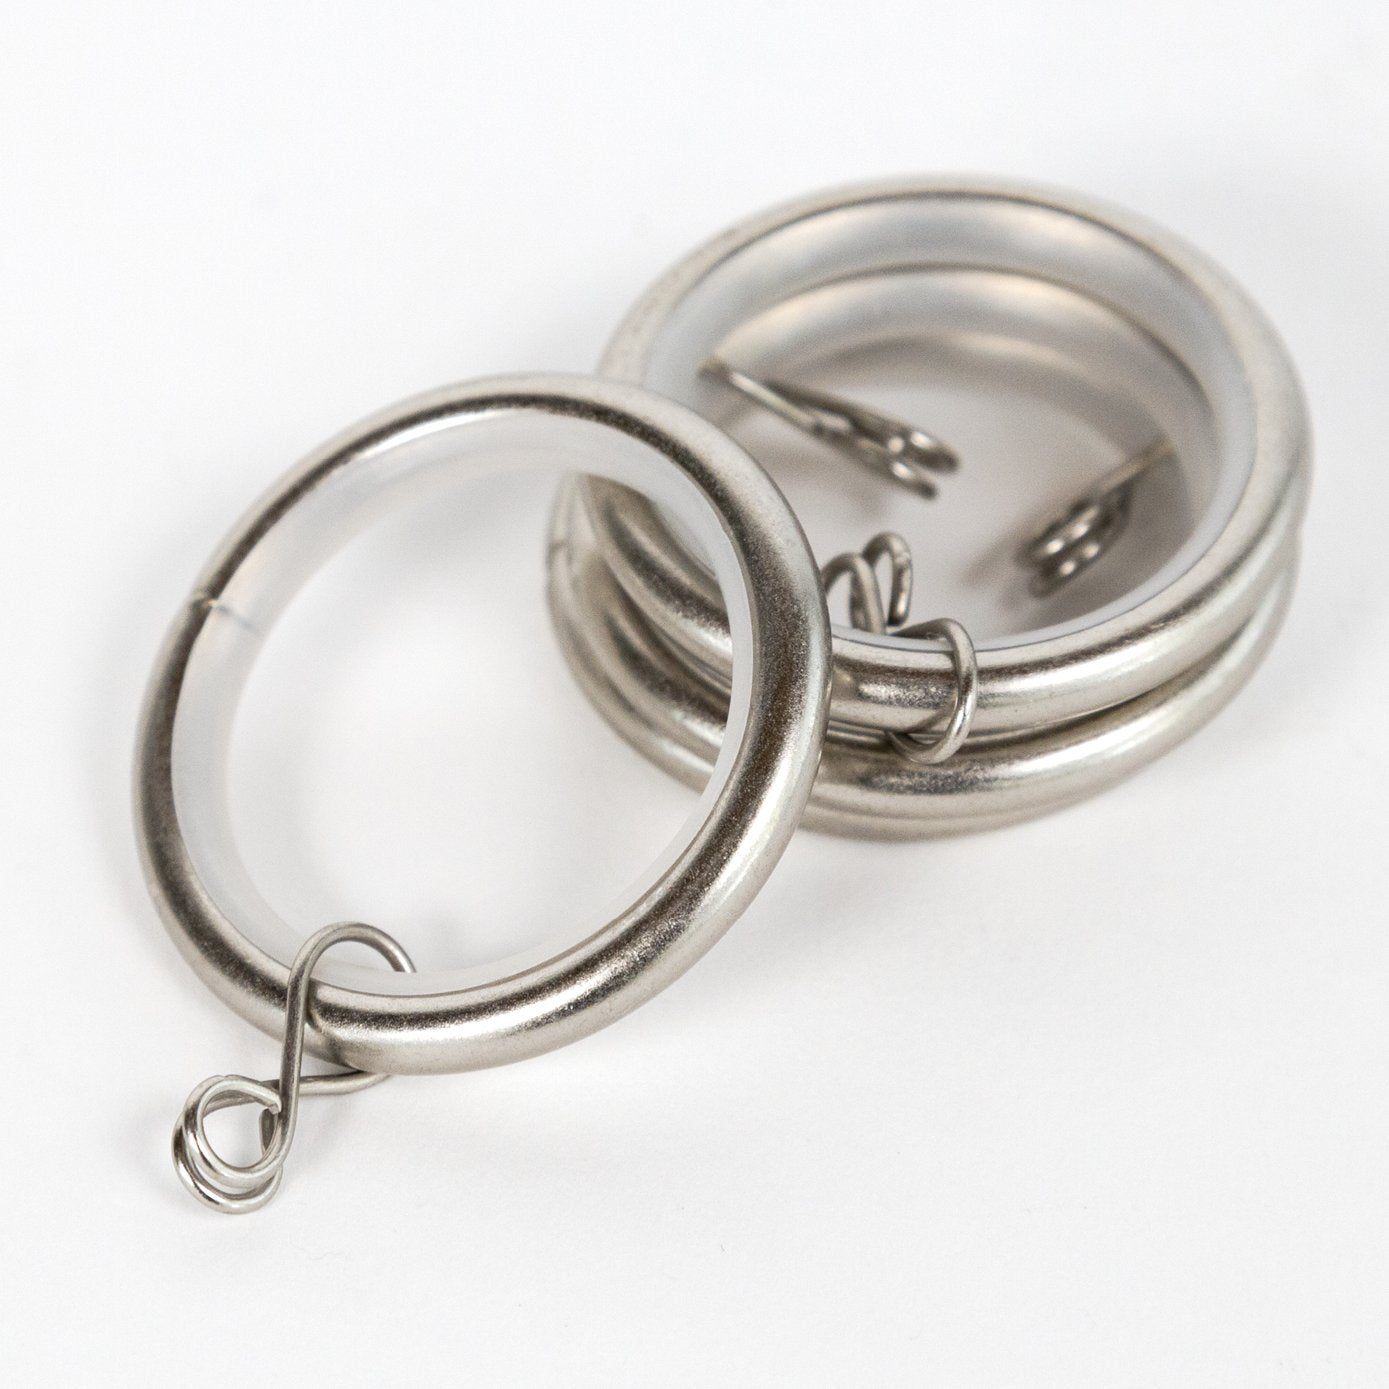 Drapery and curtain rings from Tonic Living, silver pewter